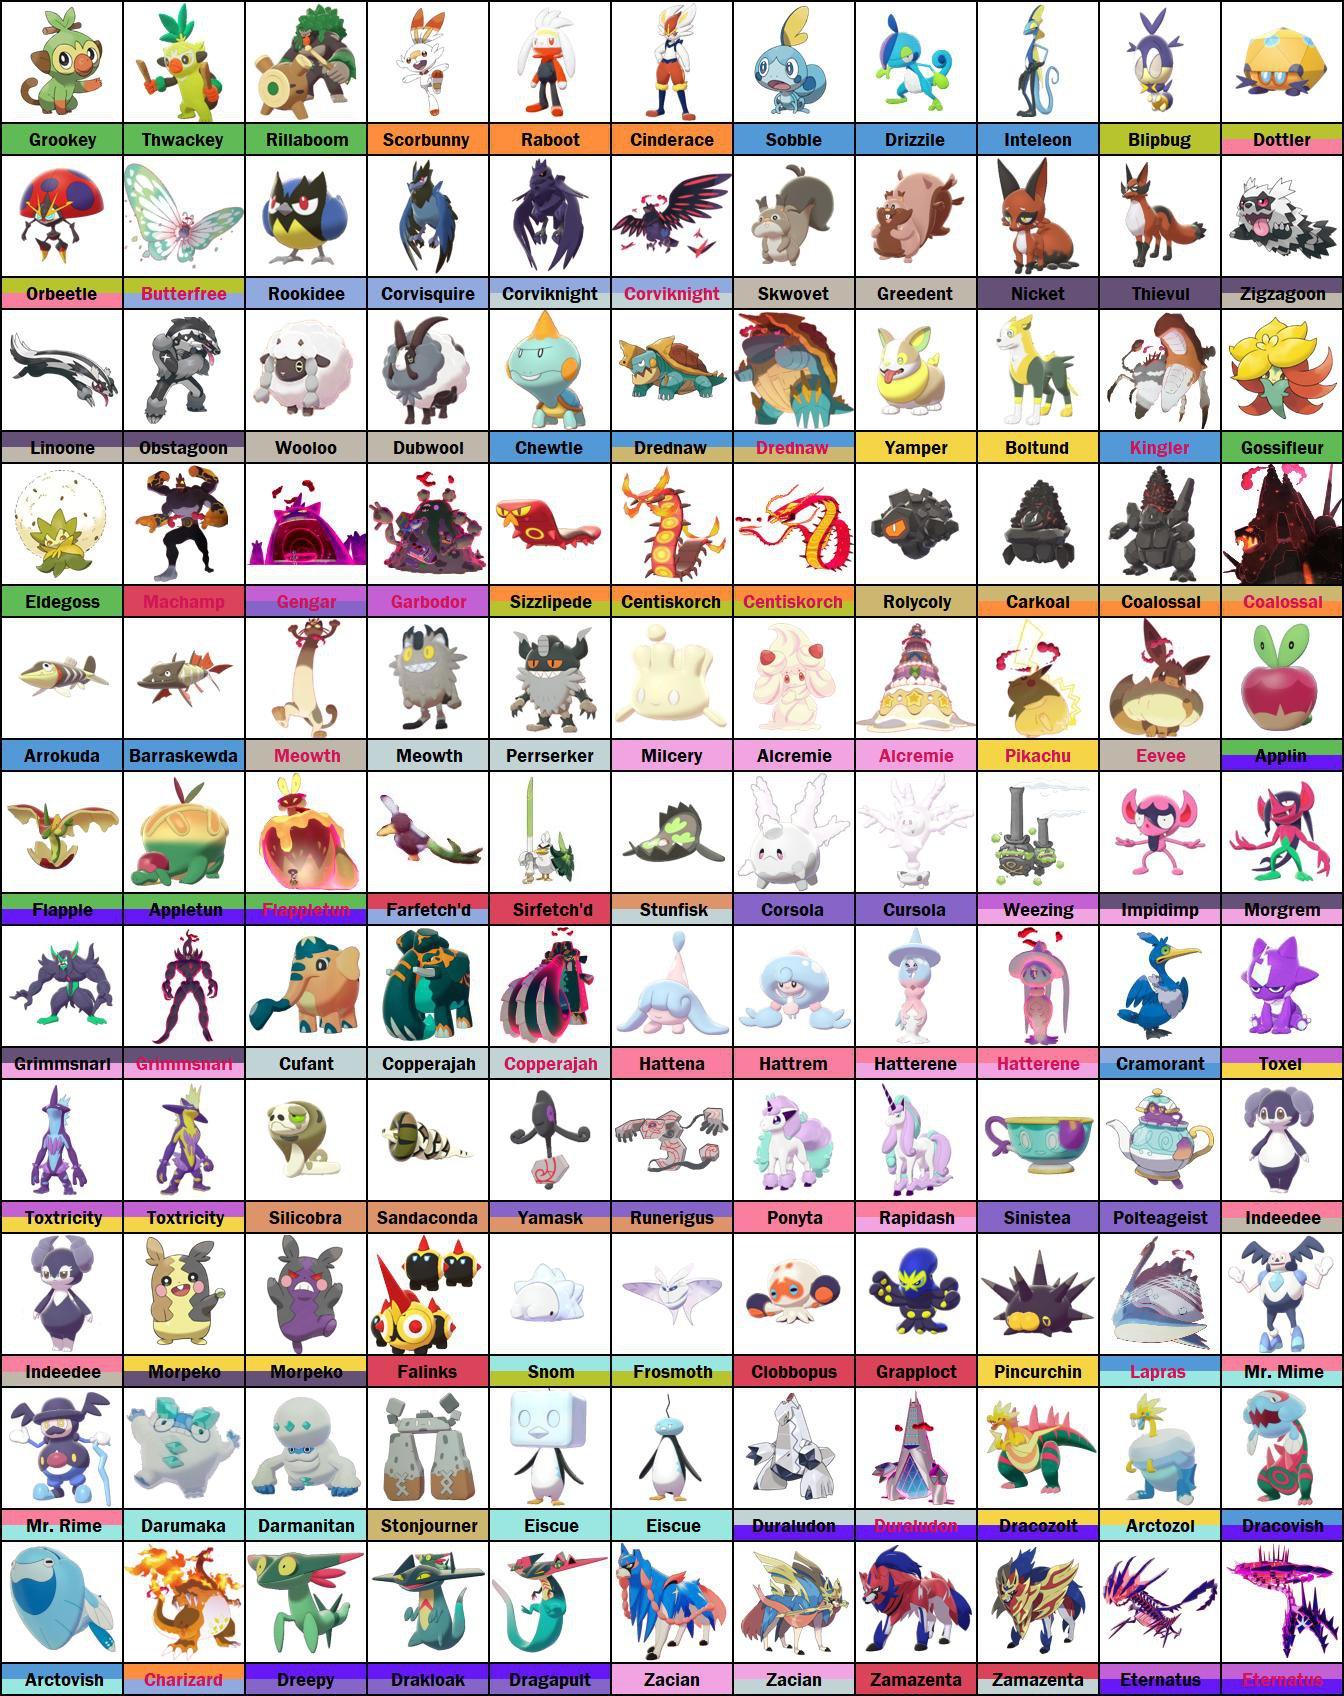 Here is the best graphic of all the new pokemon I've seen